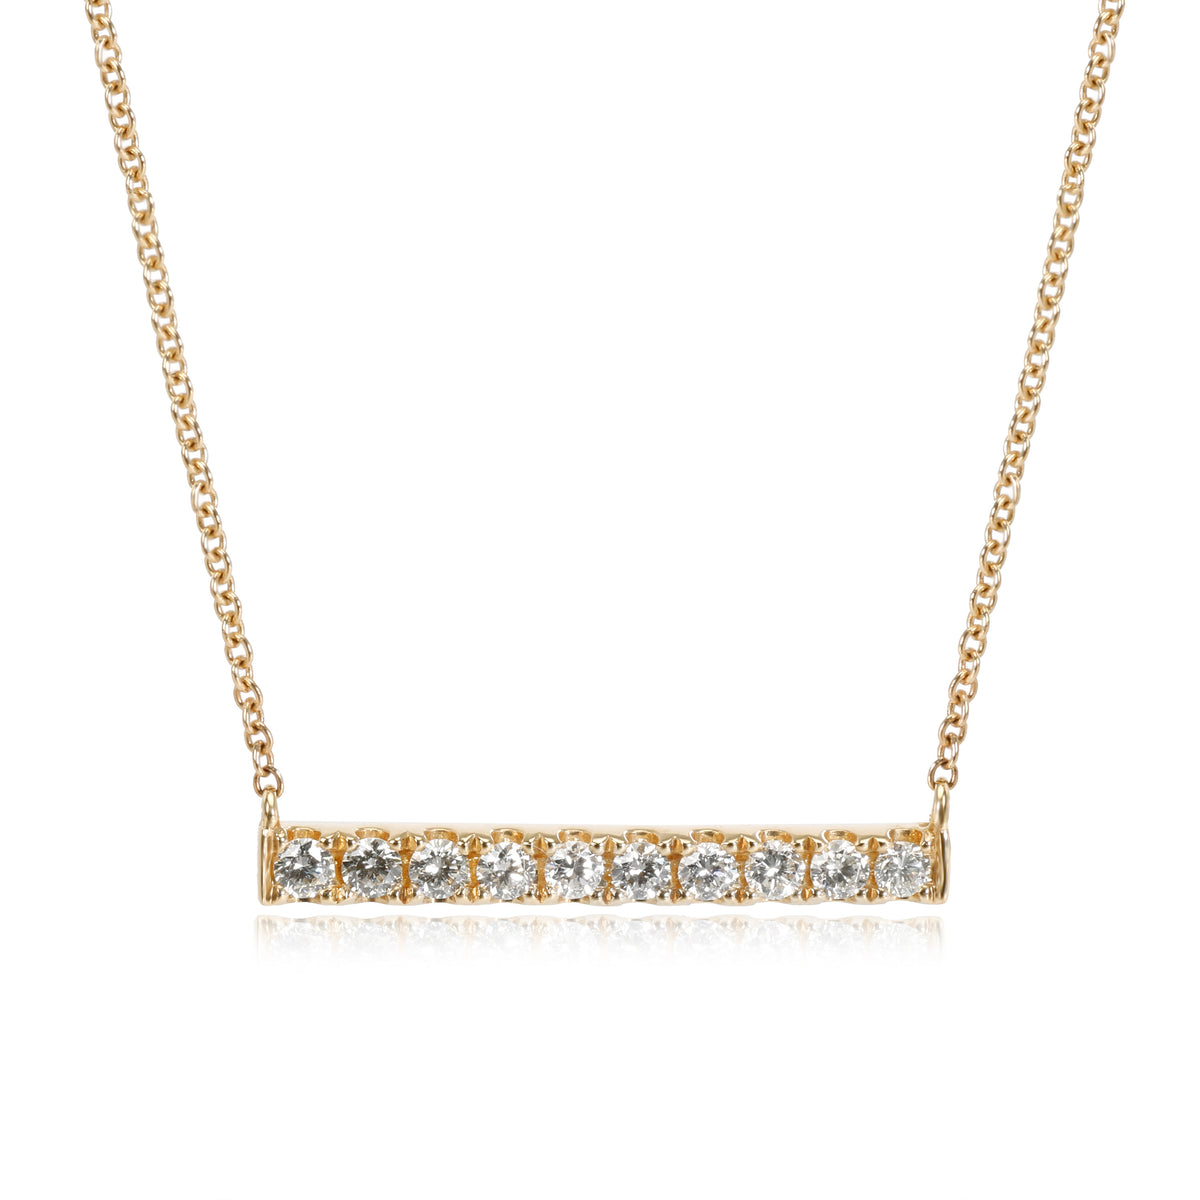 Diamond Bar Necklace in 14K Yellow Gold 0.4 CTW